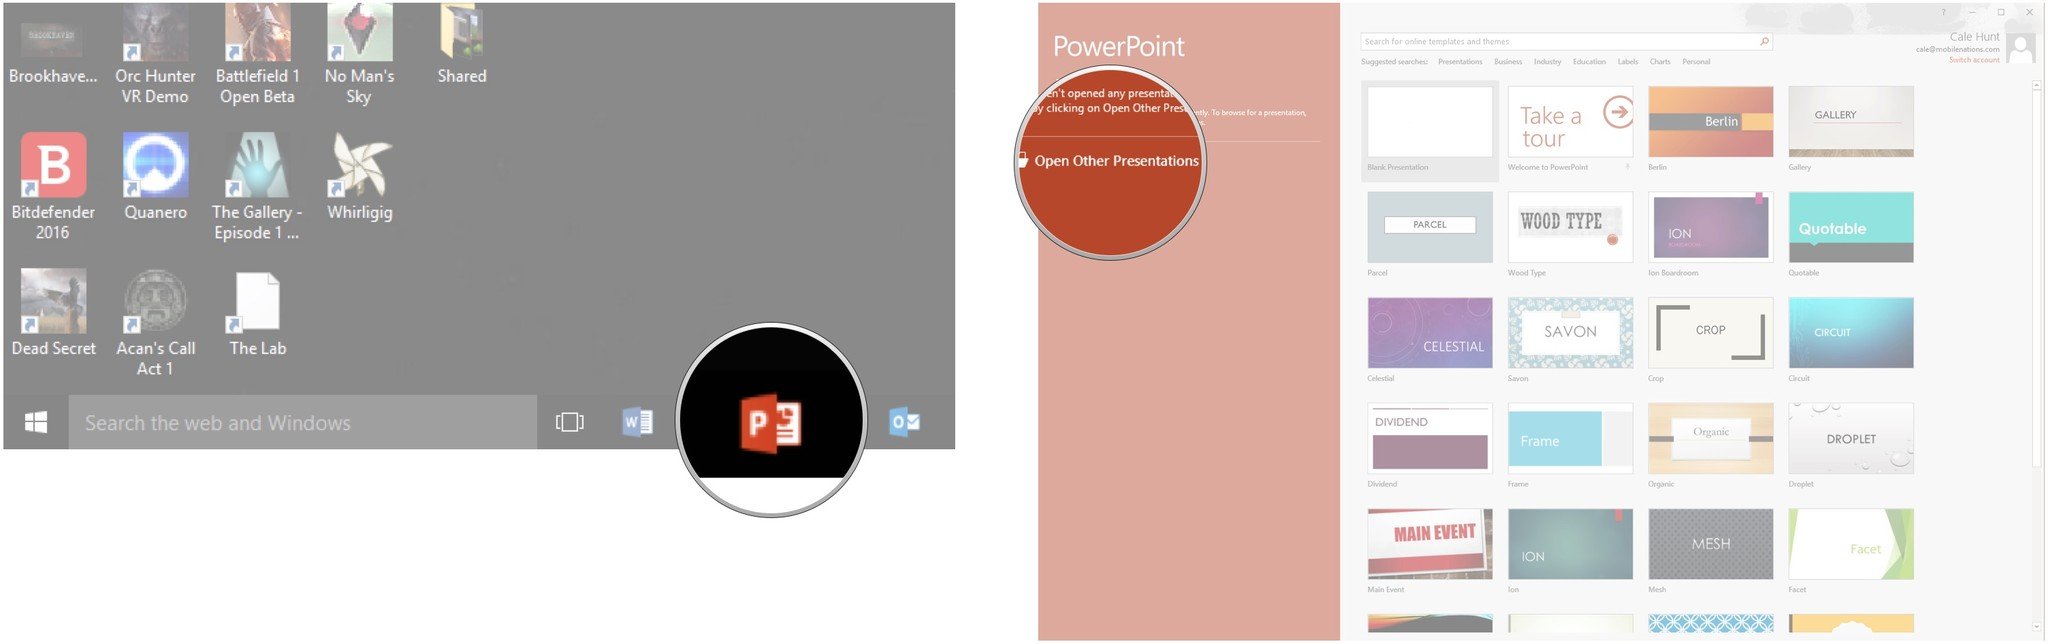 Launch PowerPoint. Click Open Other Presentation.